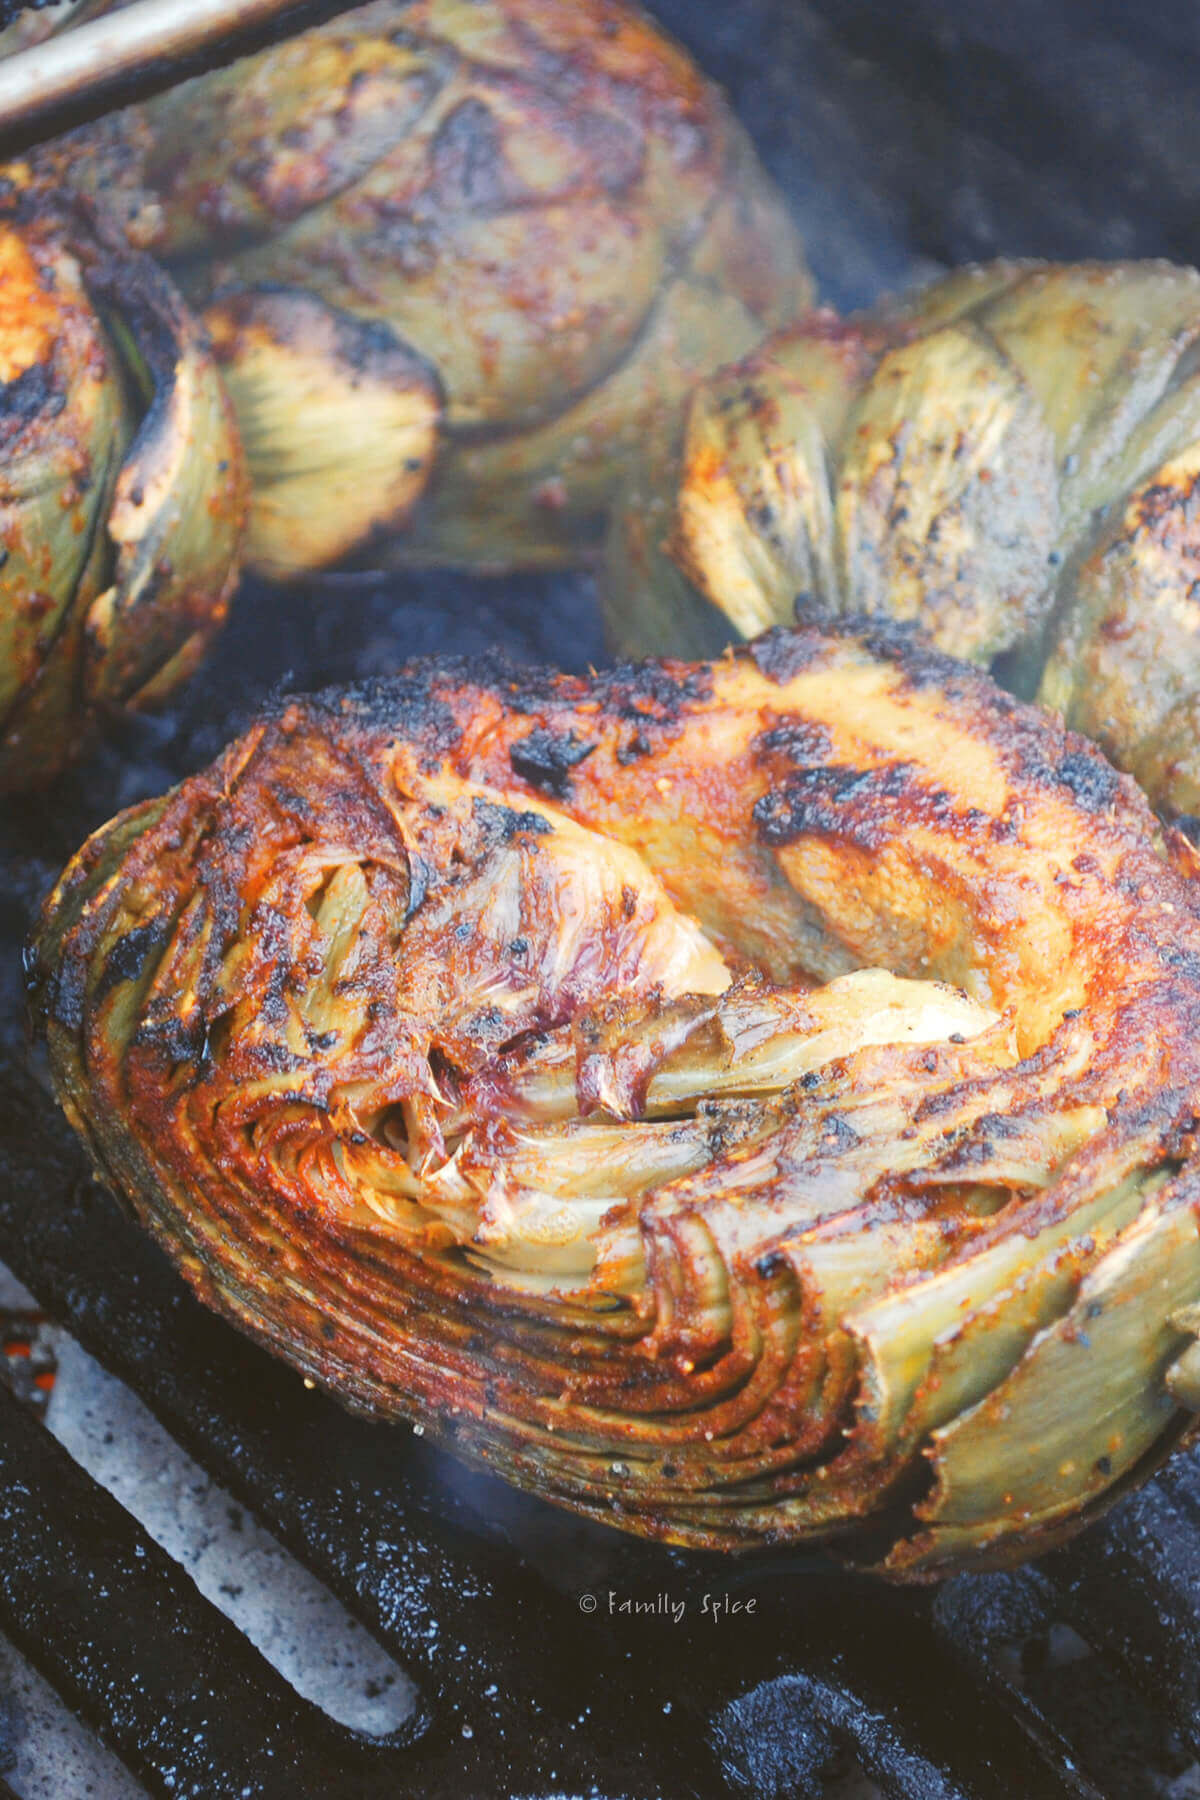 Halved artichokes seasoned with chile lime and cooking on a grill